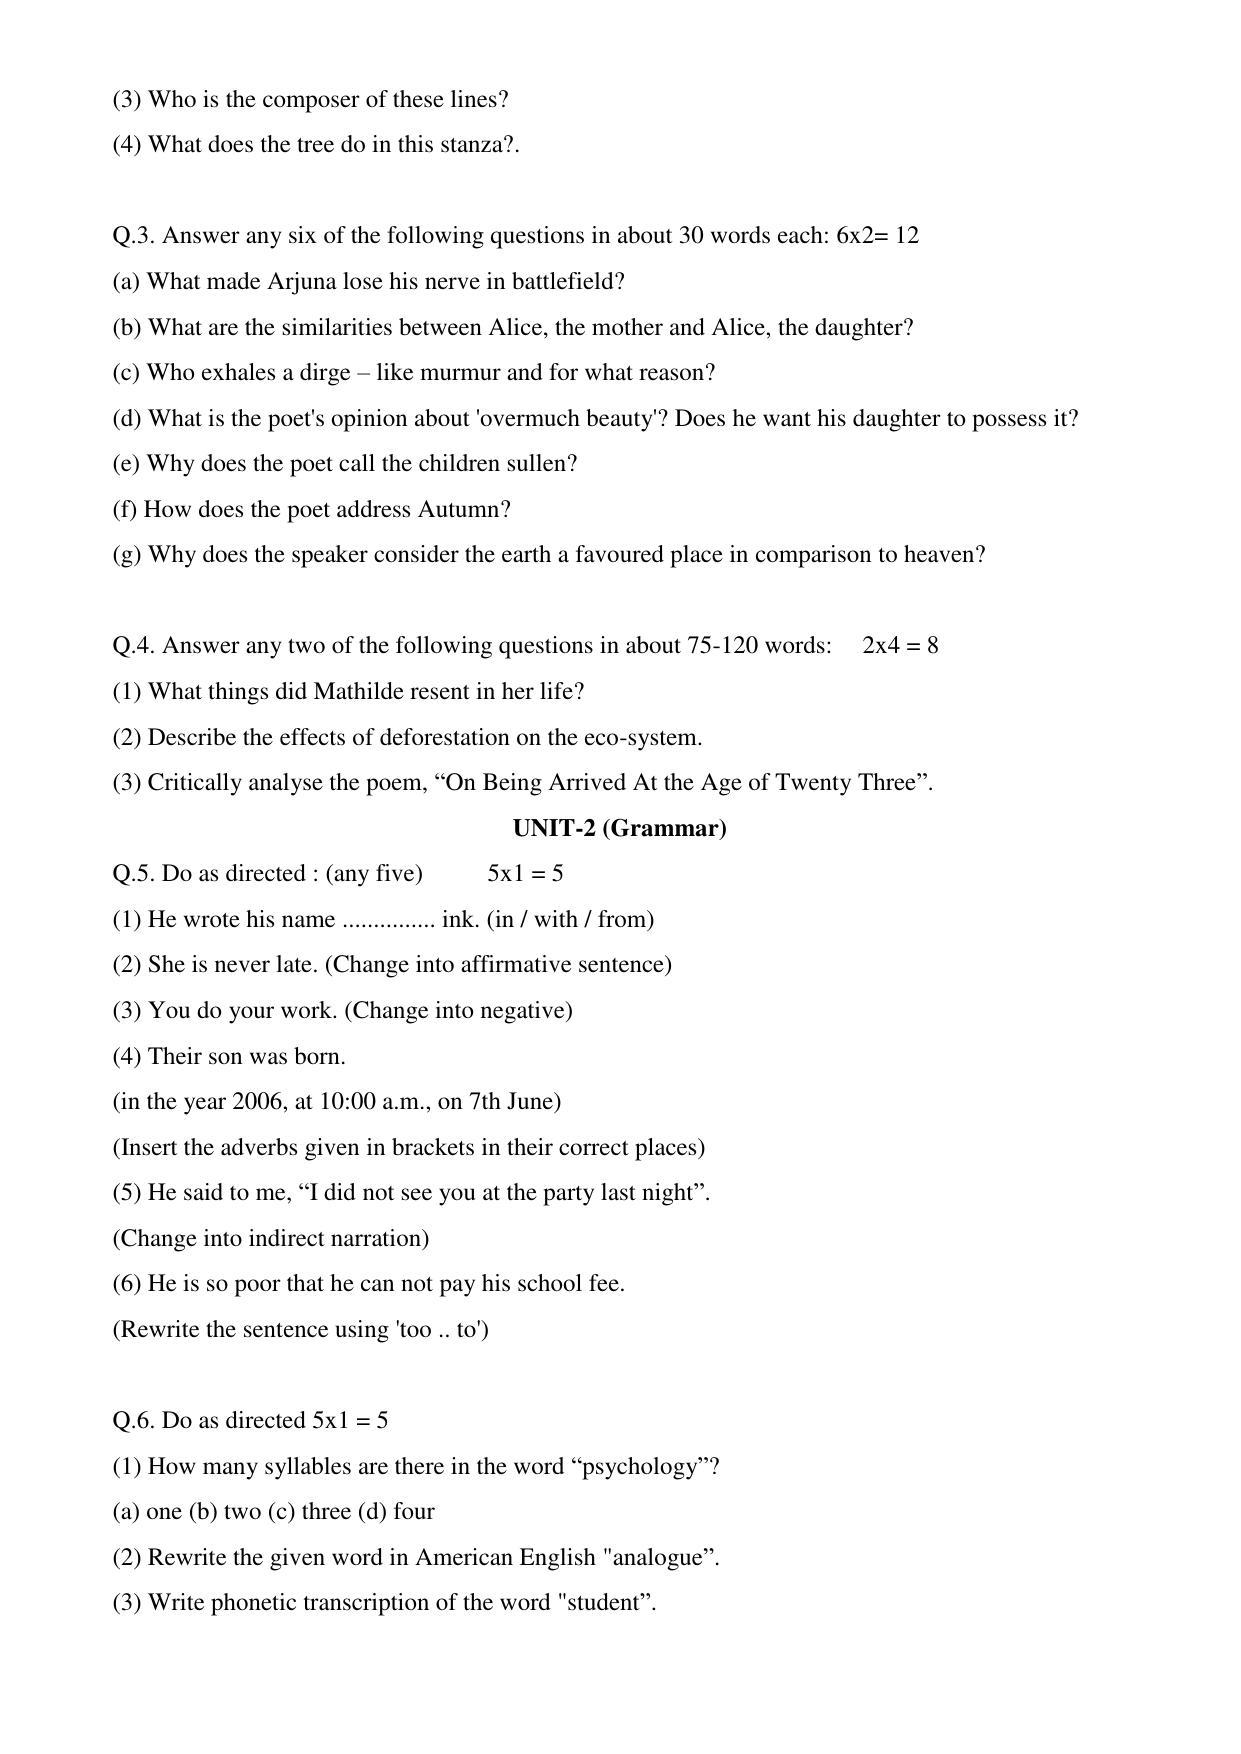 MP Board Class 12 English Special 2018 Question Paper - Page 2